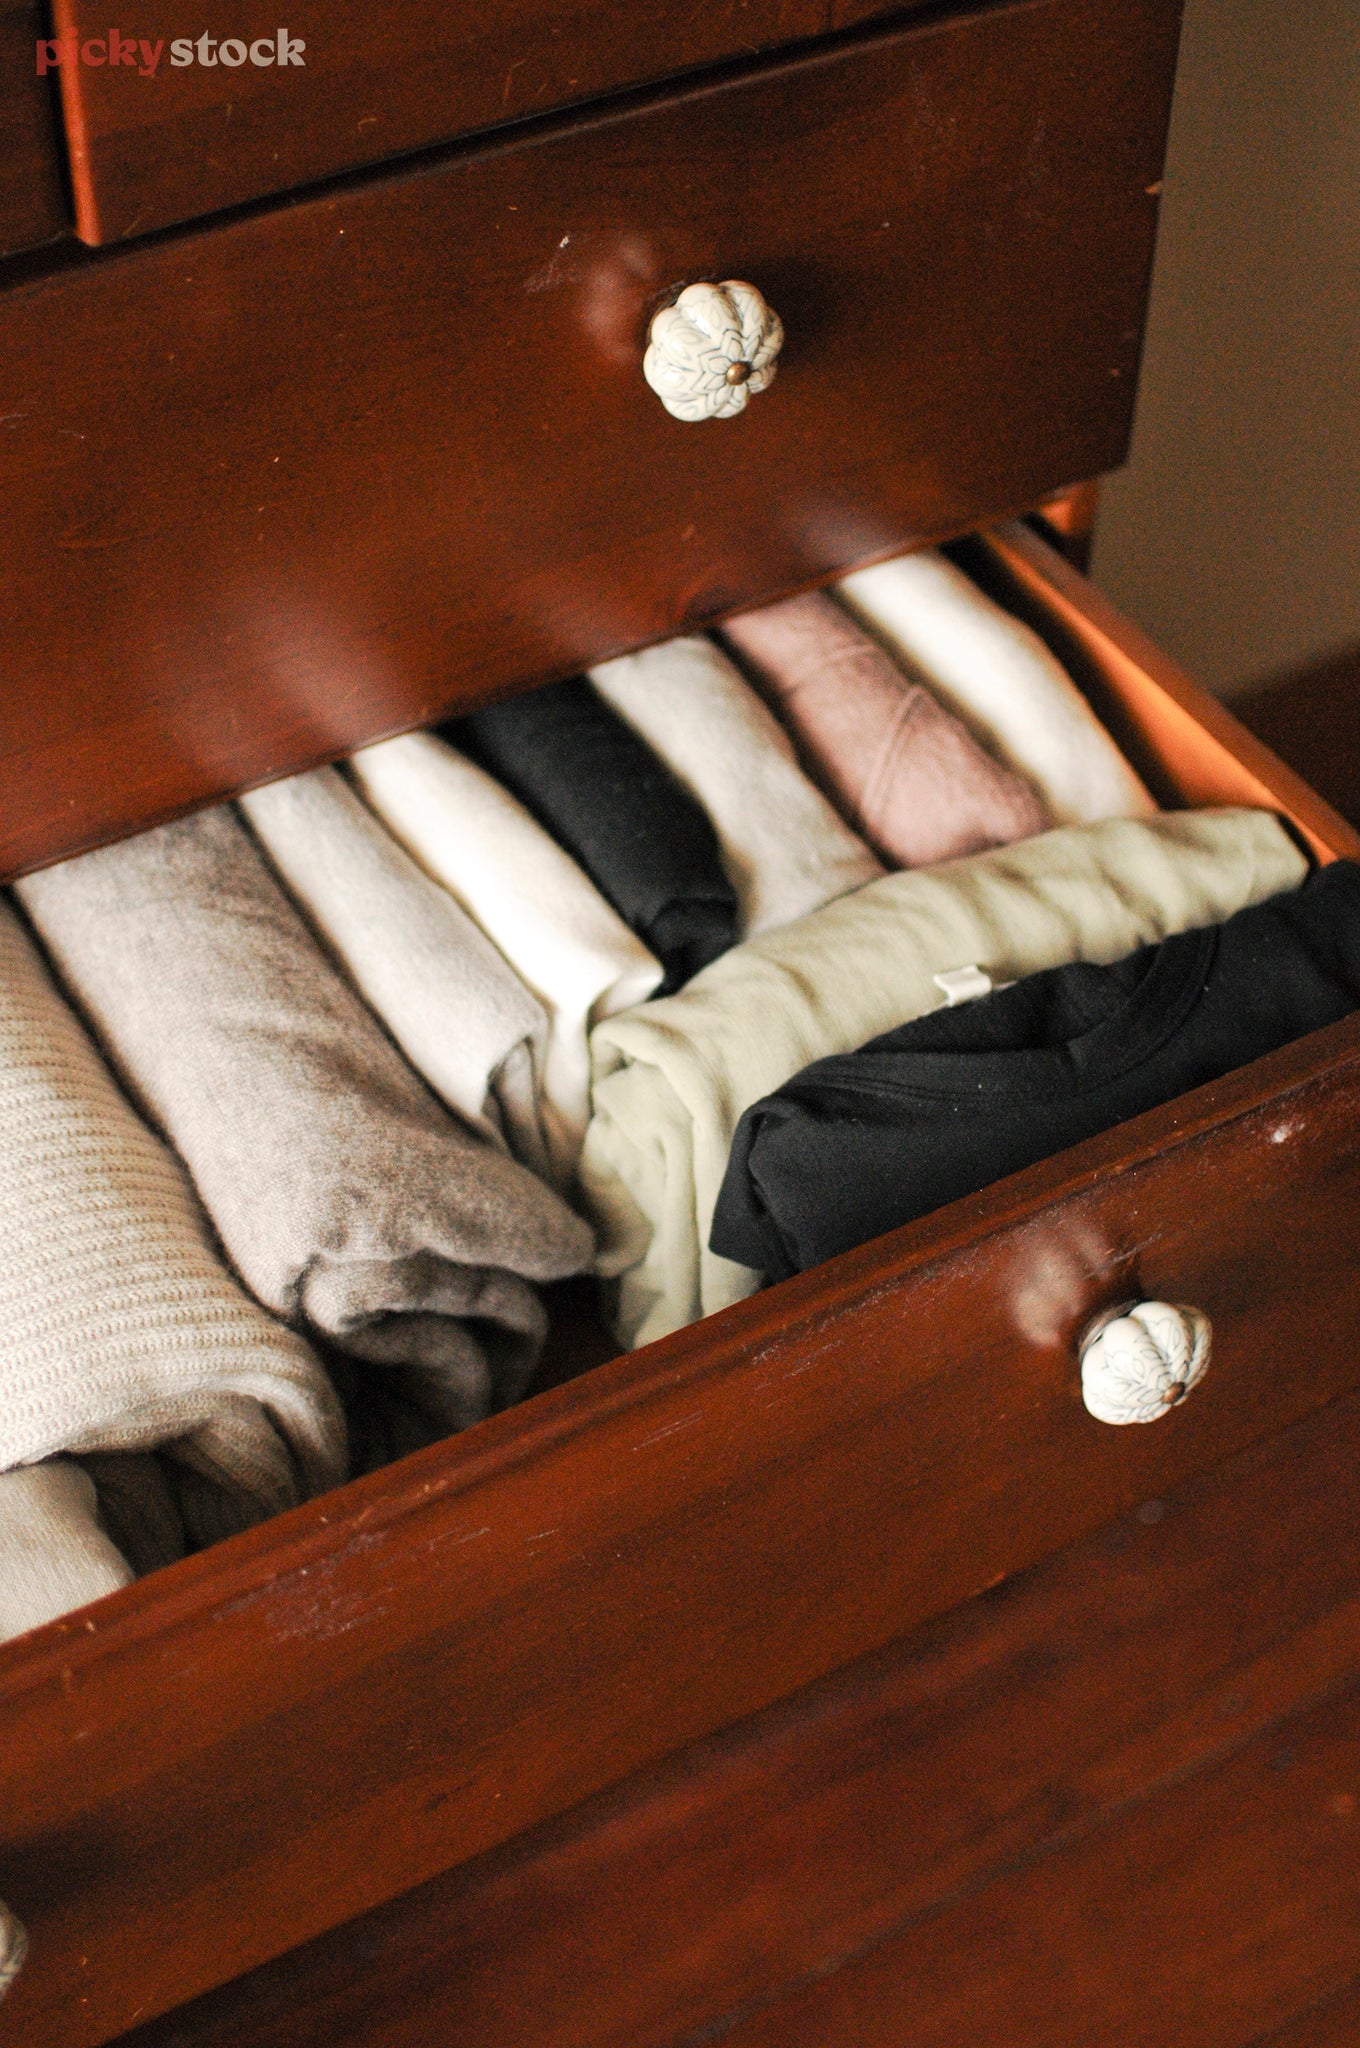 Portrait close-up of cold weather clothes neatly folded inside a wooden clothes dresser with white ceramic handles.